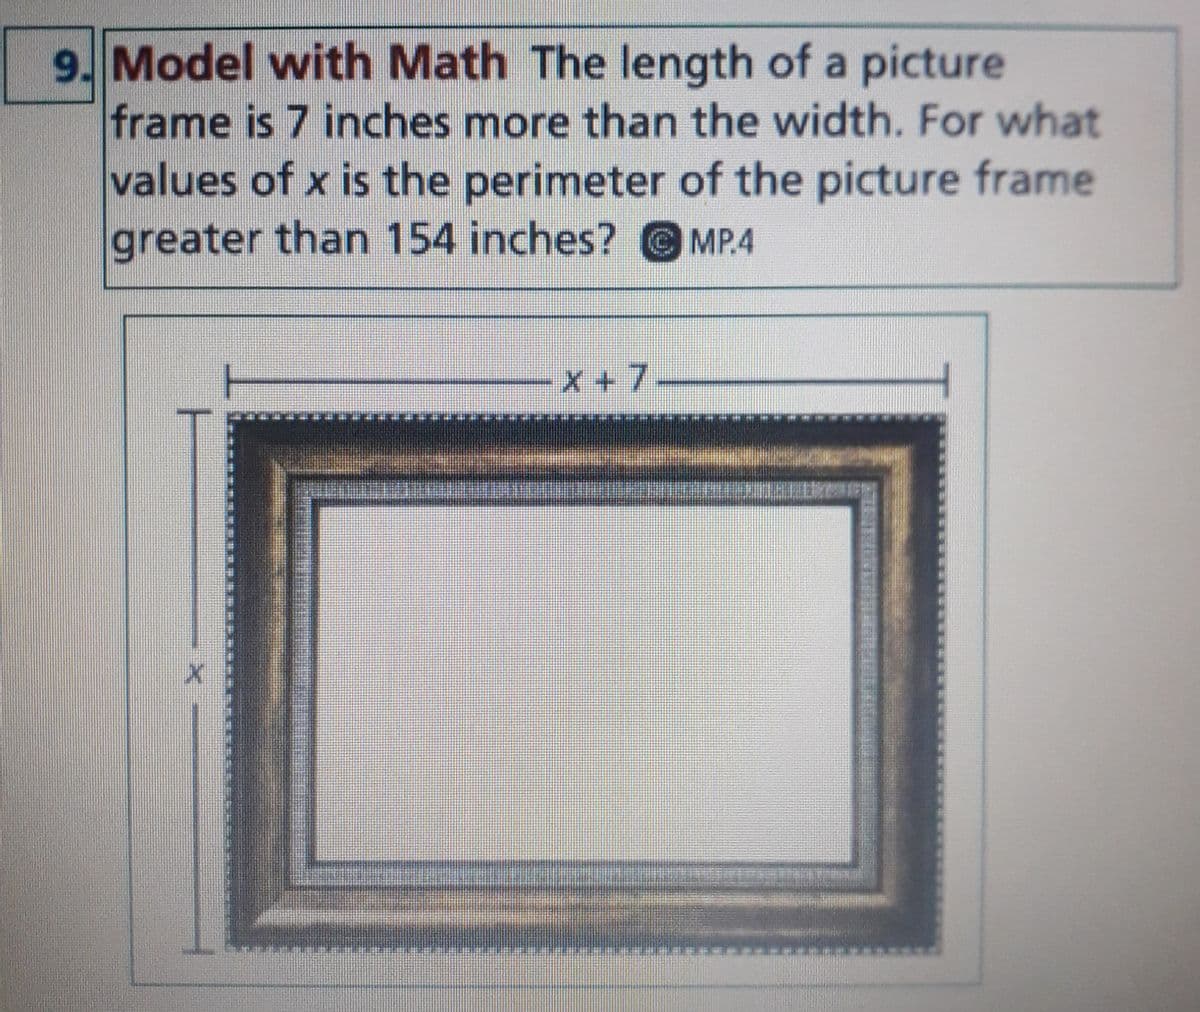 9. Model with Math The length of a picture
frame is 7 inches more than the width. For what
values of x is the perimeter of the picture frame
greater than 154 inches? MP.4
X +7
